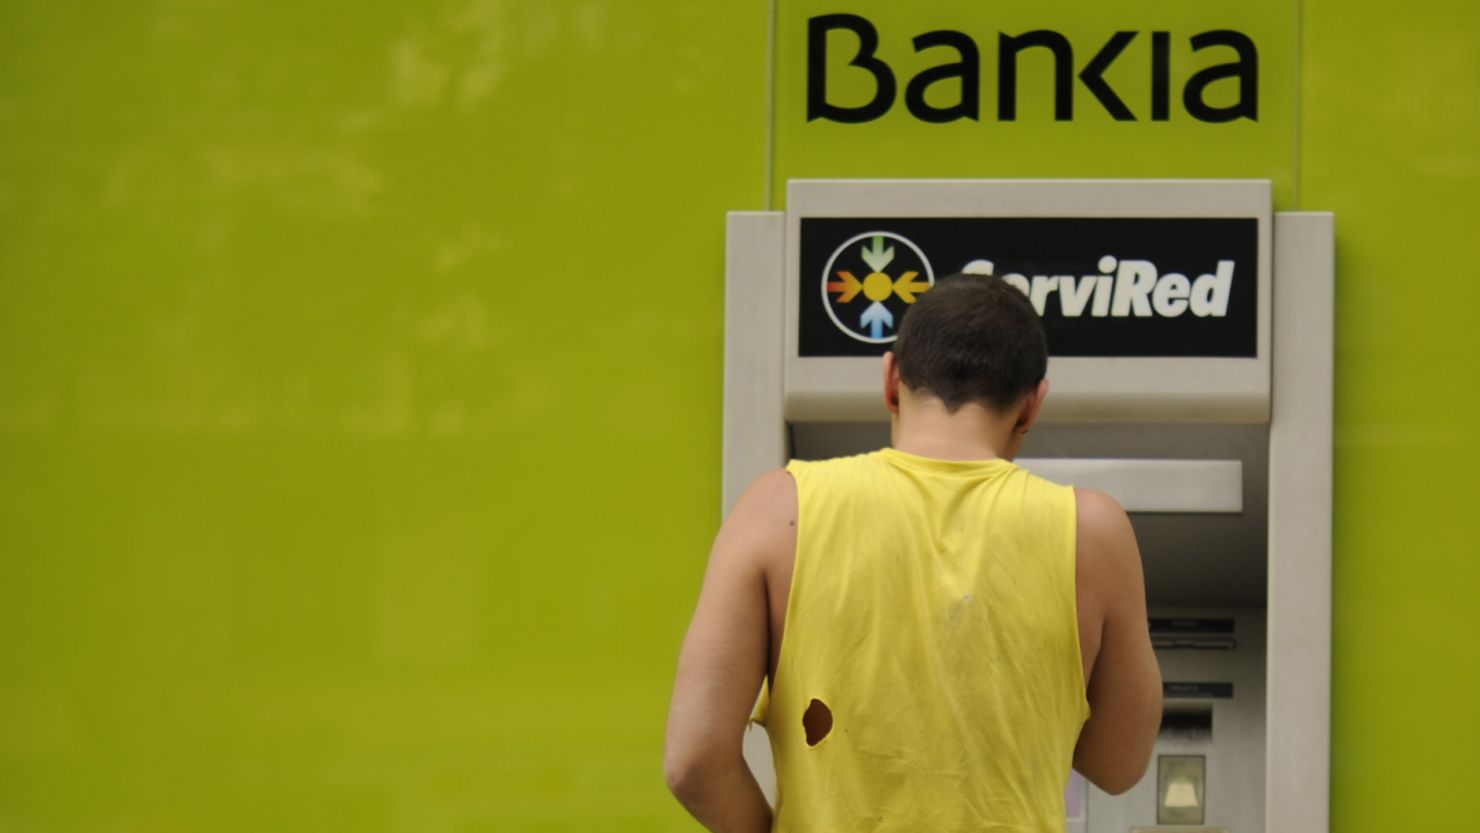 A man uses a Bankia ATM machine in Madrid, Spain.